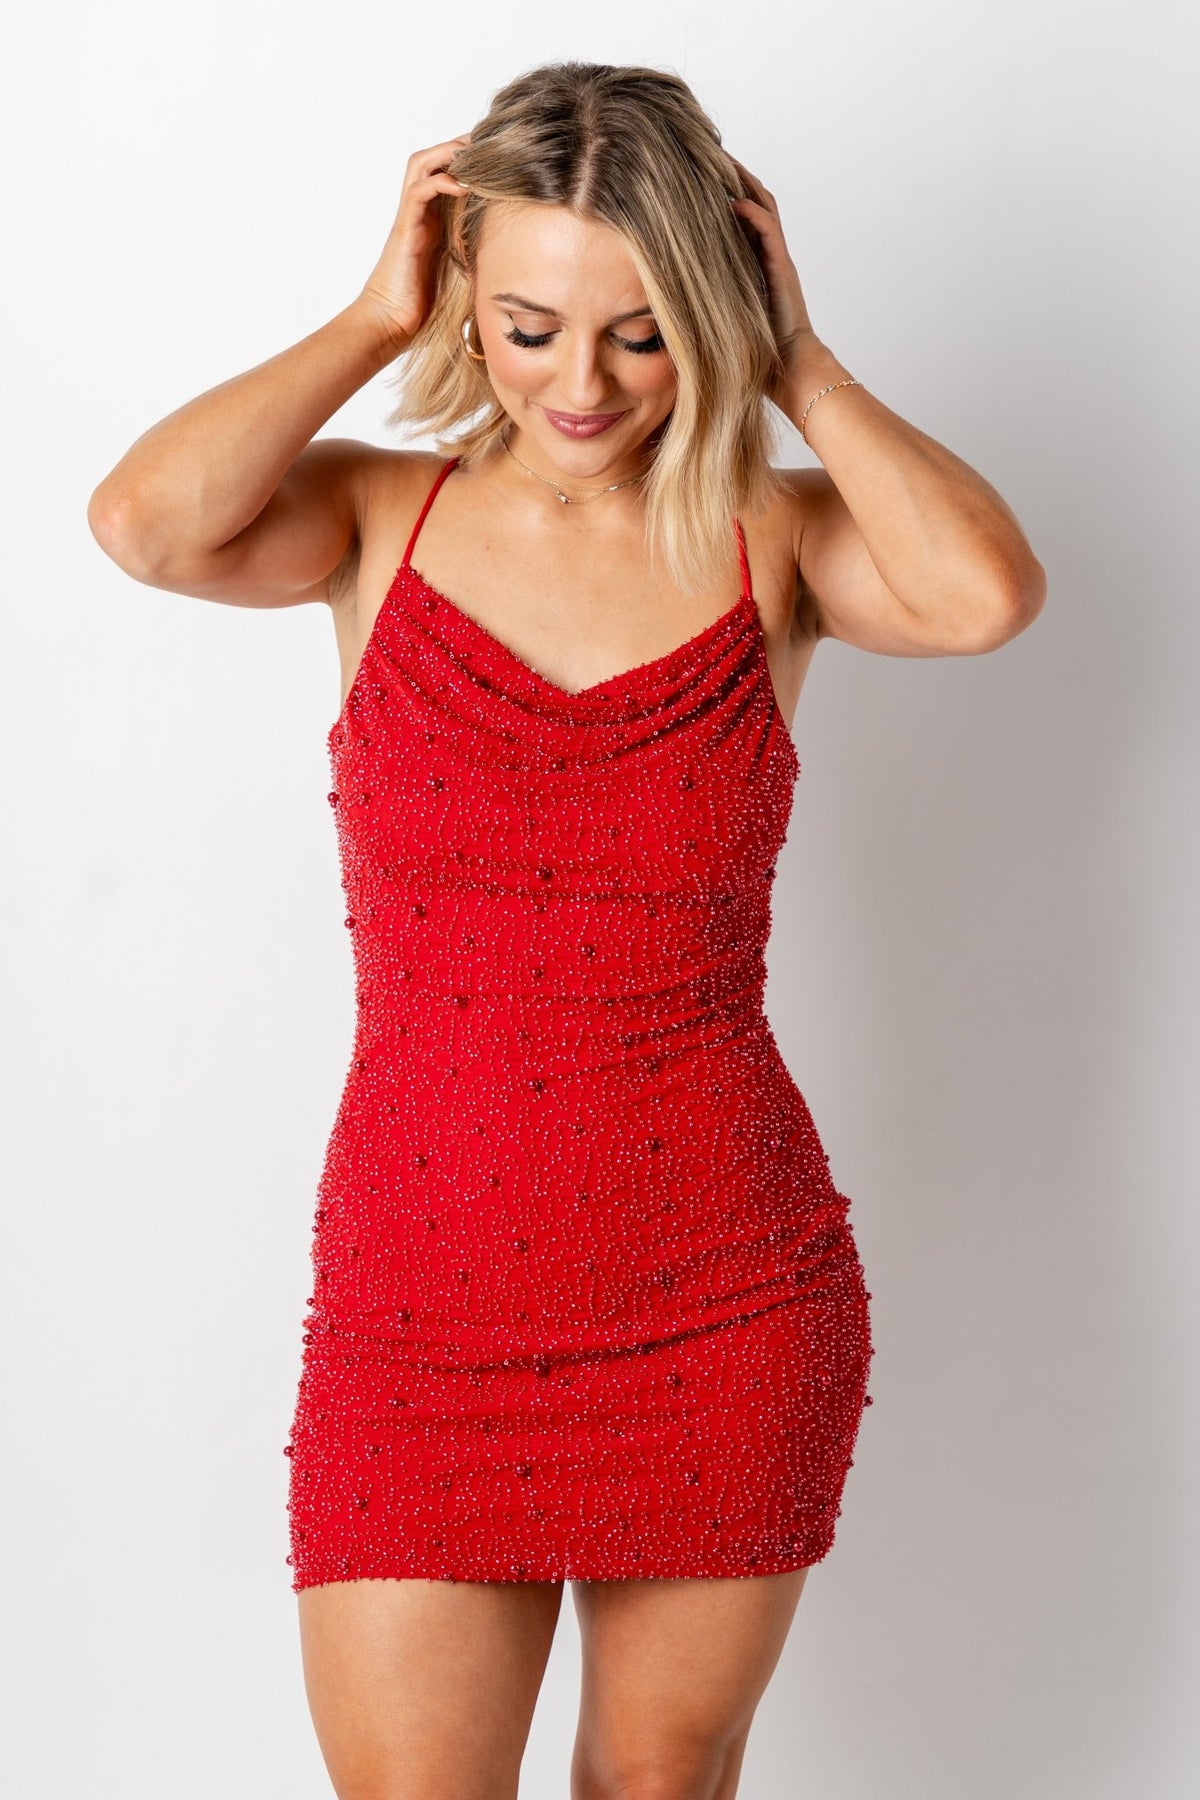 Embellished mini dress red - Cute dress - Trendy Dresses at Lush Fashion Lounge Boutique in Oklahoma City